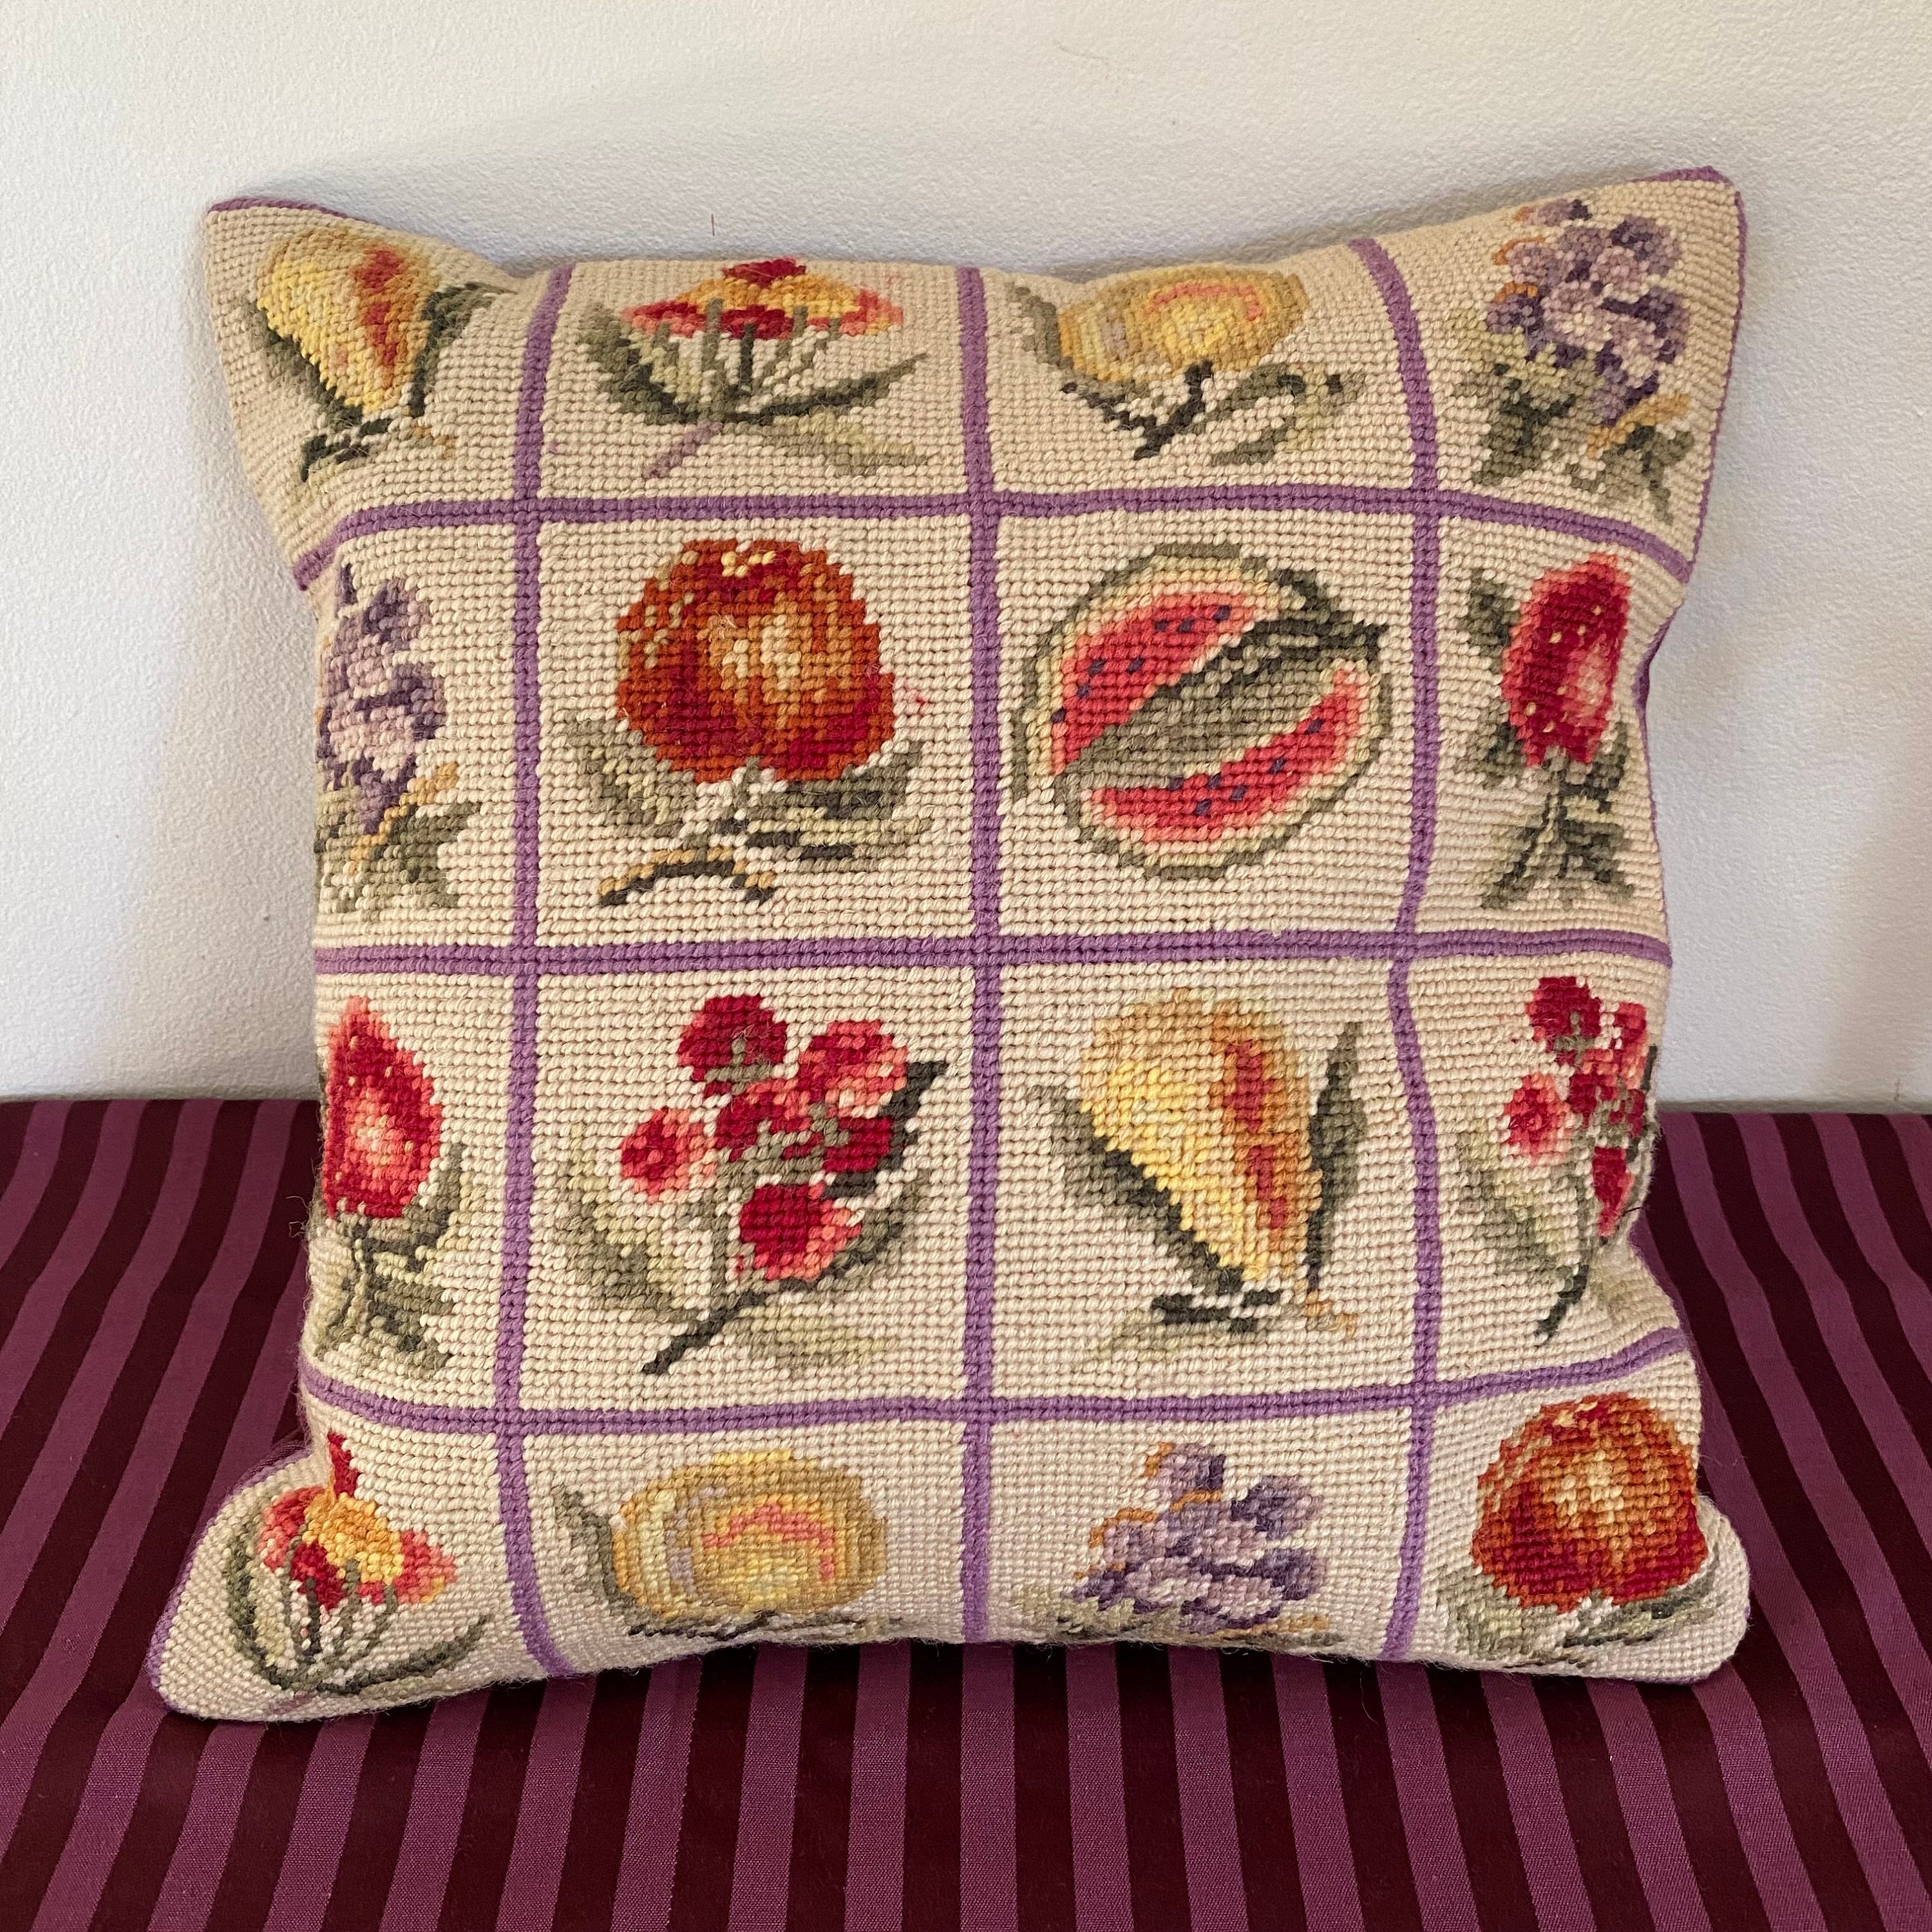 DIY Counted Cross Stitch/Tapestry Cushion Pillow Cover COZY Embroidery Kit